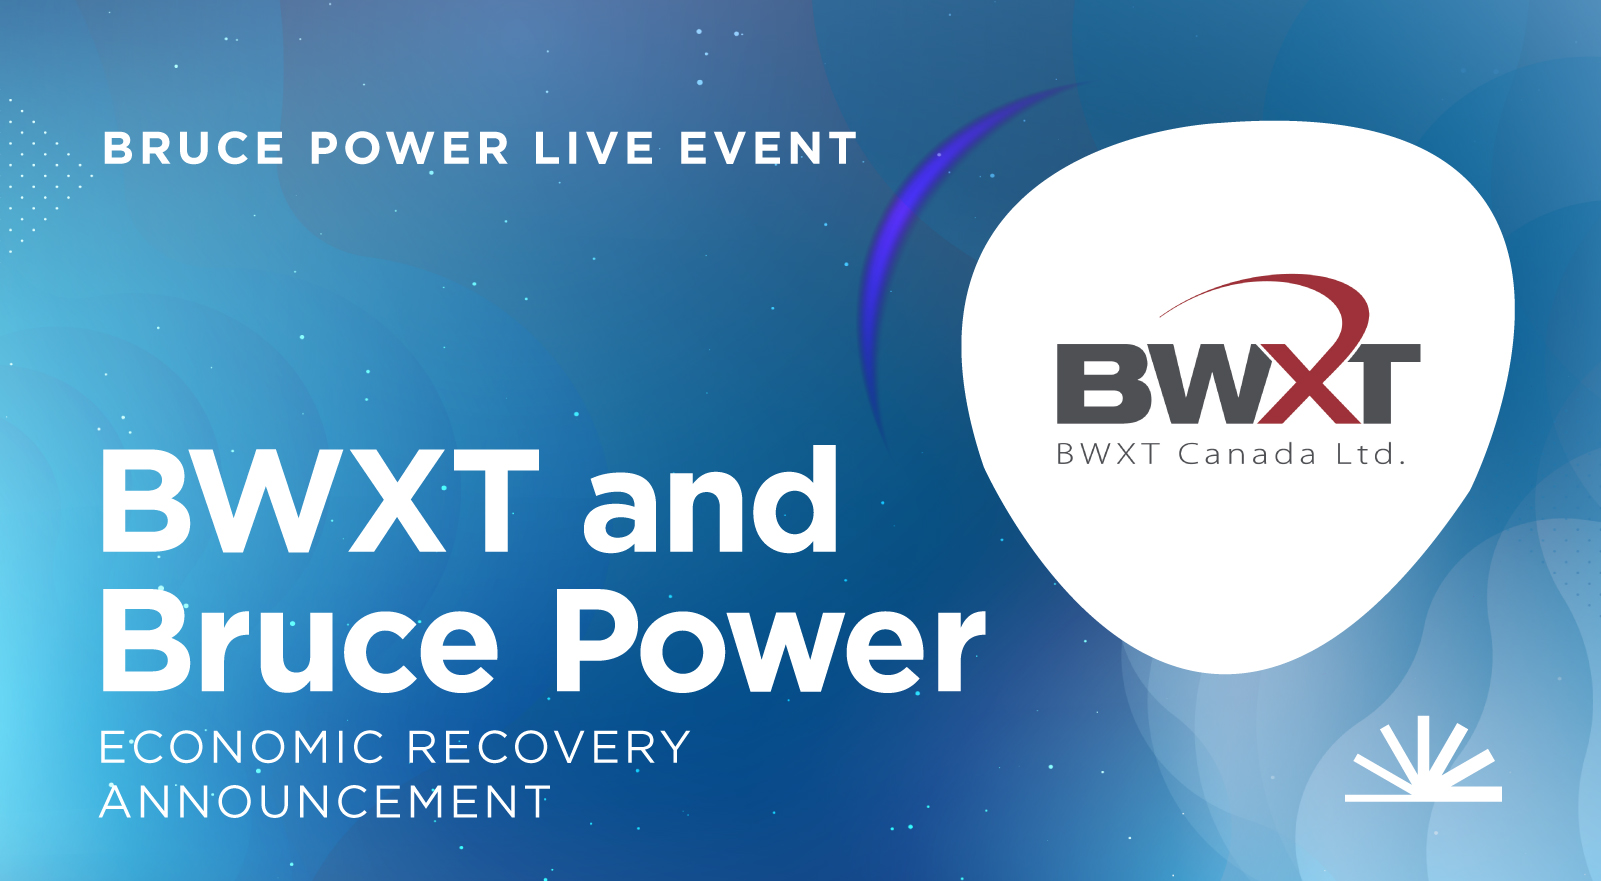 Bruce Power and BWXT economic recovery announcement